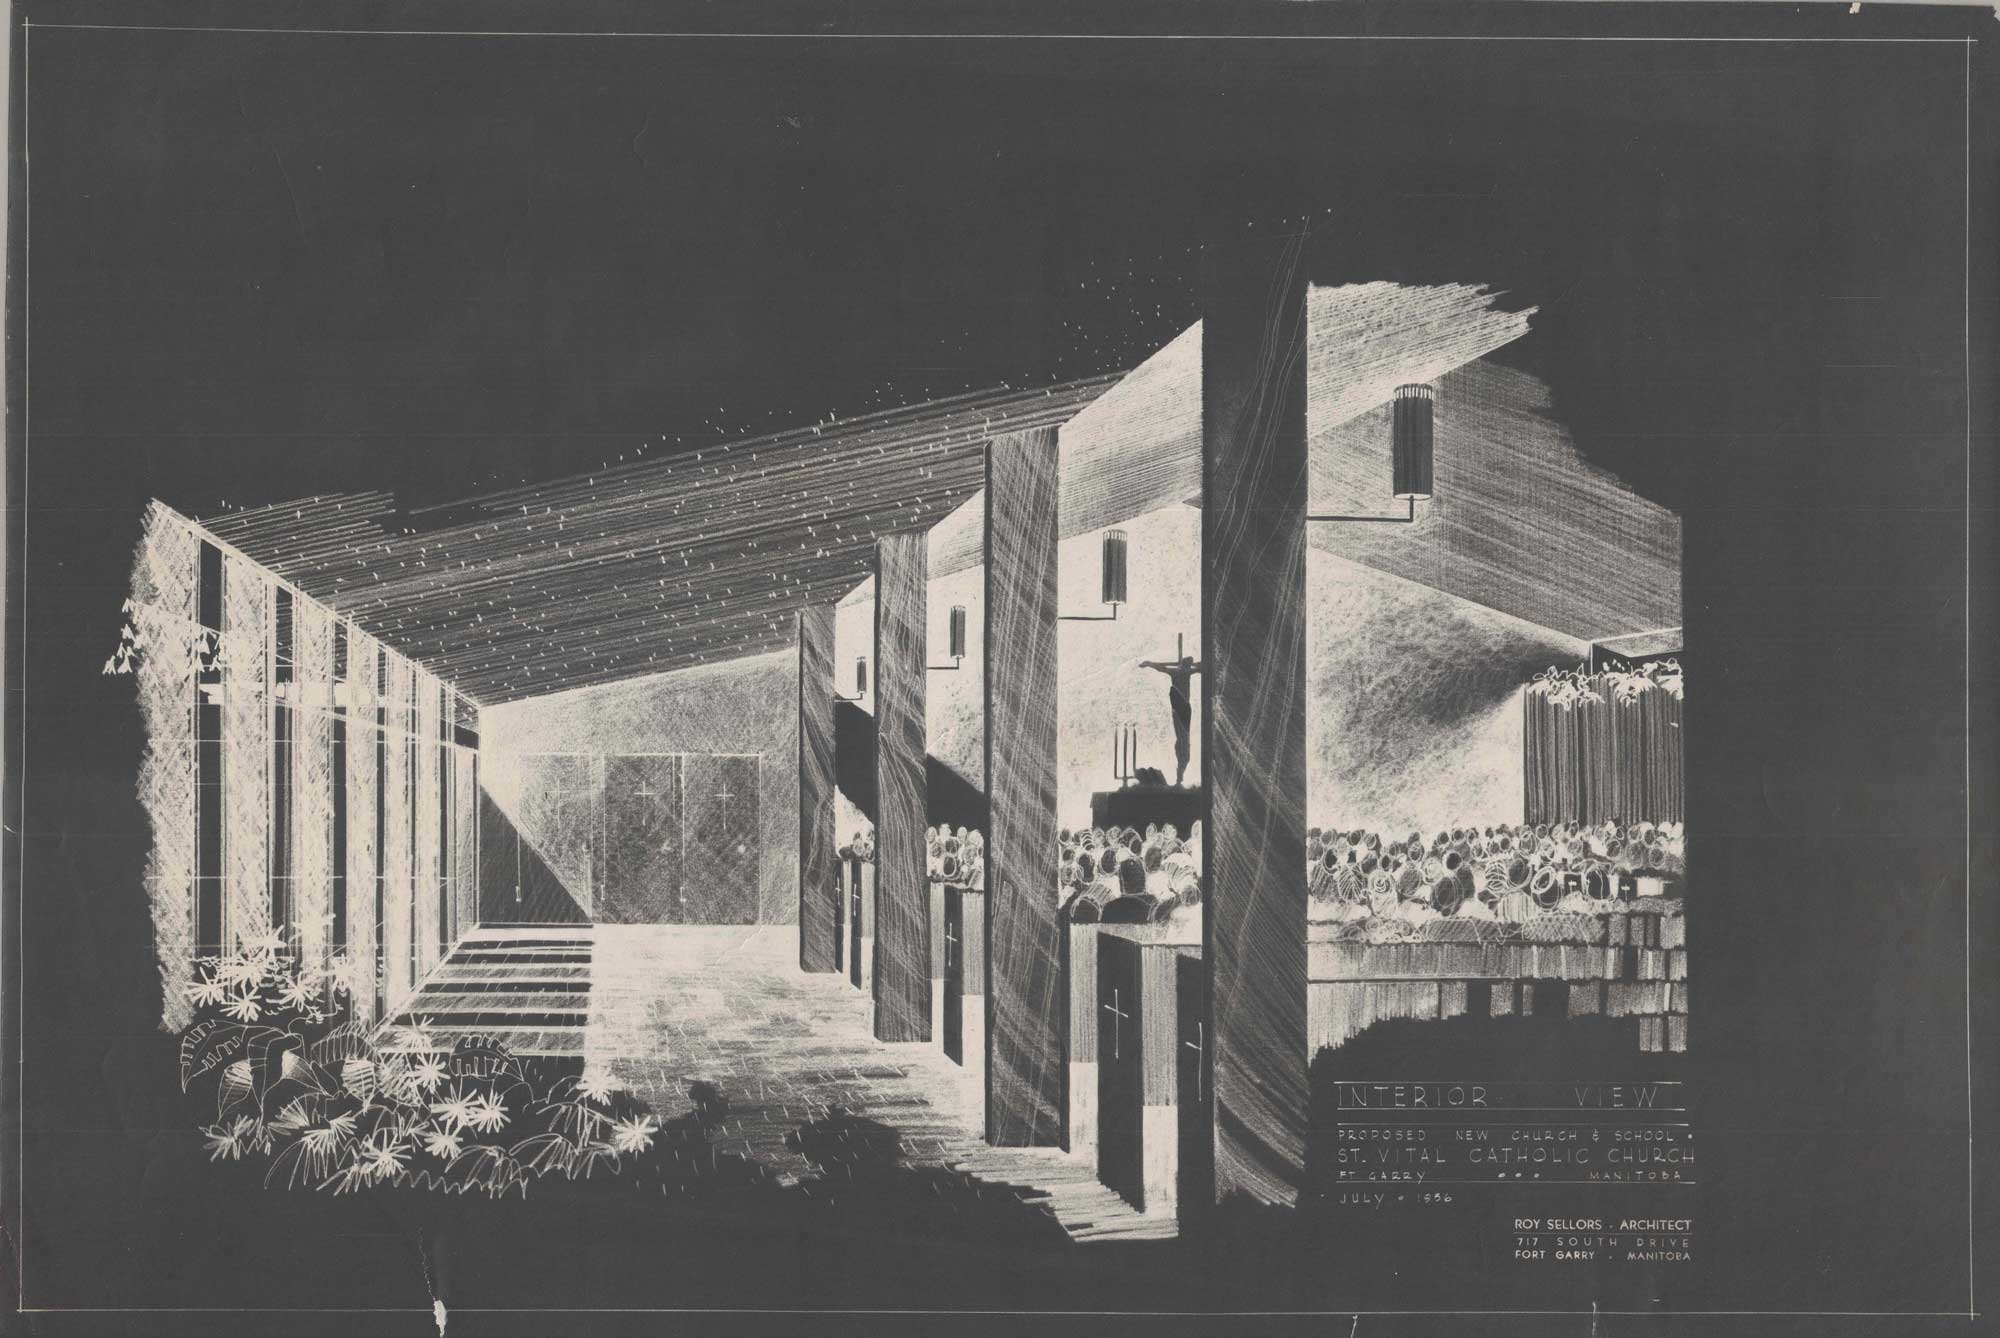 Image shows a black and white drawing of the interior of St. Vital Church. It shows the columns, pews, and the light streaming into the hall.